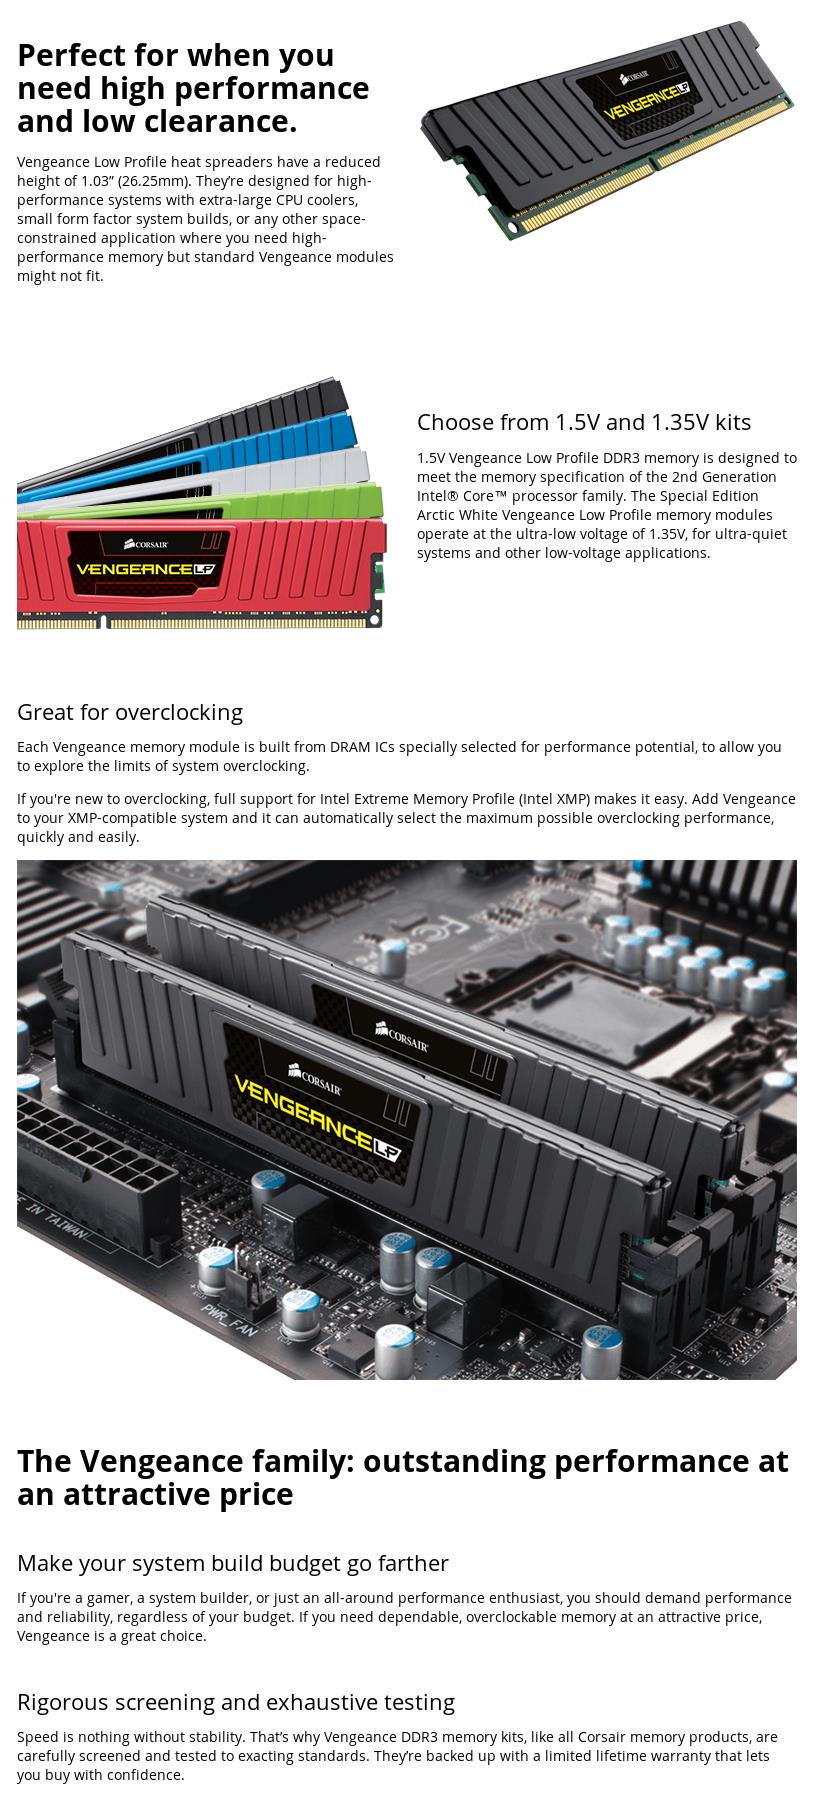 A large marketing image providing additional information about the product Corsair 8GB Kit (2x4GB) DDR3 Vengeance LP C9 1600MHz - Black - Additional alt info not provided